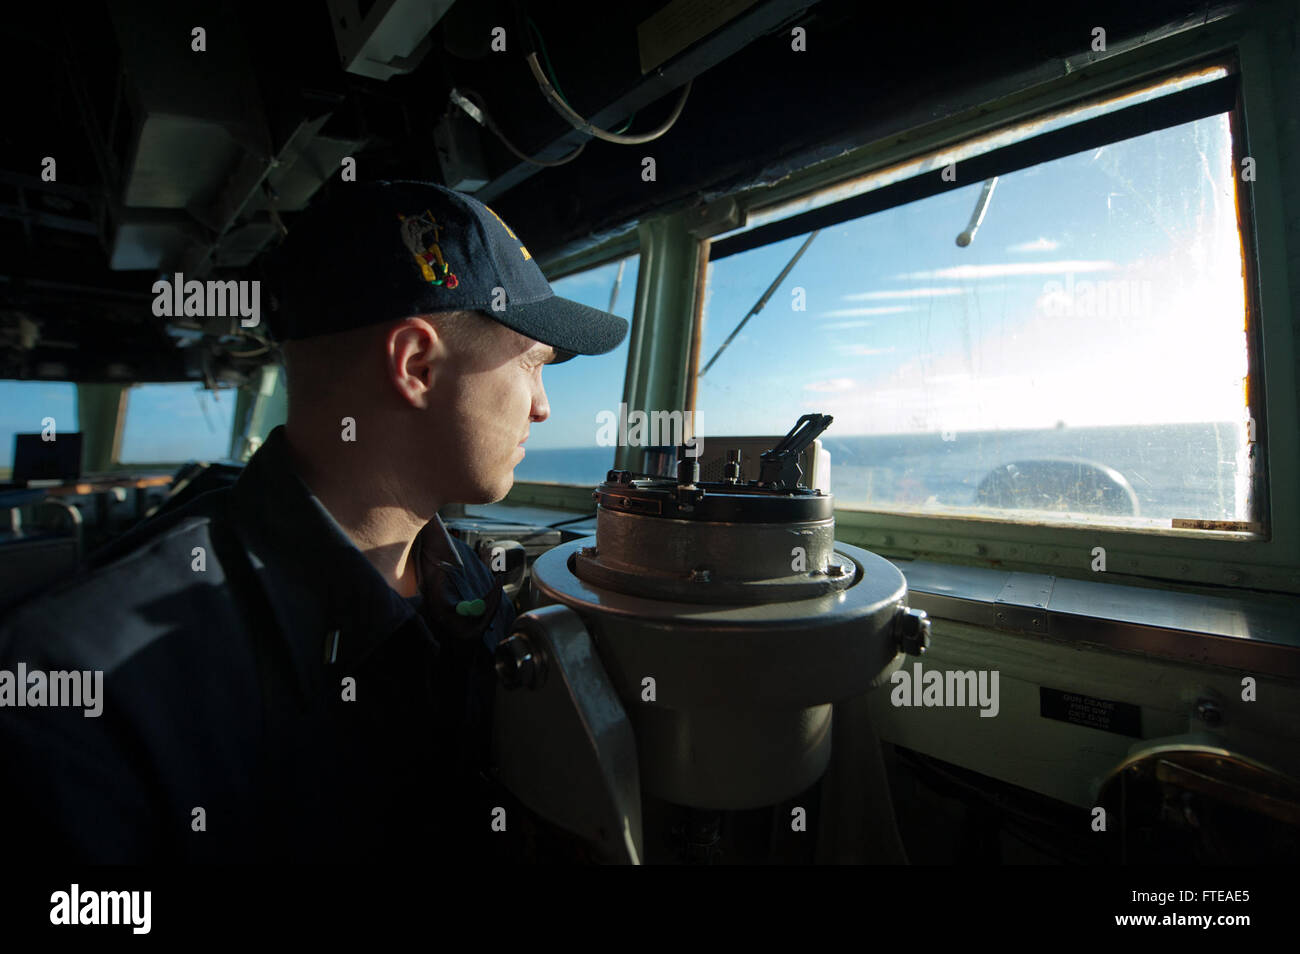 140227-N-WD757-055: MEDITERRANEAN SEA (Feb. 27, 2014) – Lt.j.g. Benjamin Pitzel monitors ship direction and distance as the guided-missile destroyer USS Arleigh Burke (DDG 51) transits through the Strait of Gibraltar en route to the Mediterranean Sea. Arleigh Burke is on a scheduled deployment in support of maritime security operations and theater security cooperation efforts in the U.S. 5th and 6th Fleet area of operations. (U.S. Navy photo by Mass Communication Specialist 2nd Class Carlos M. Vazquez II/Released) Stock Photo